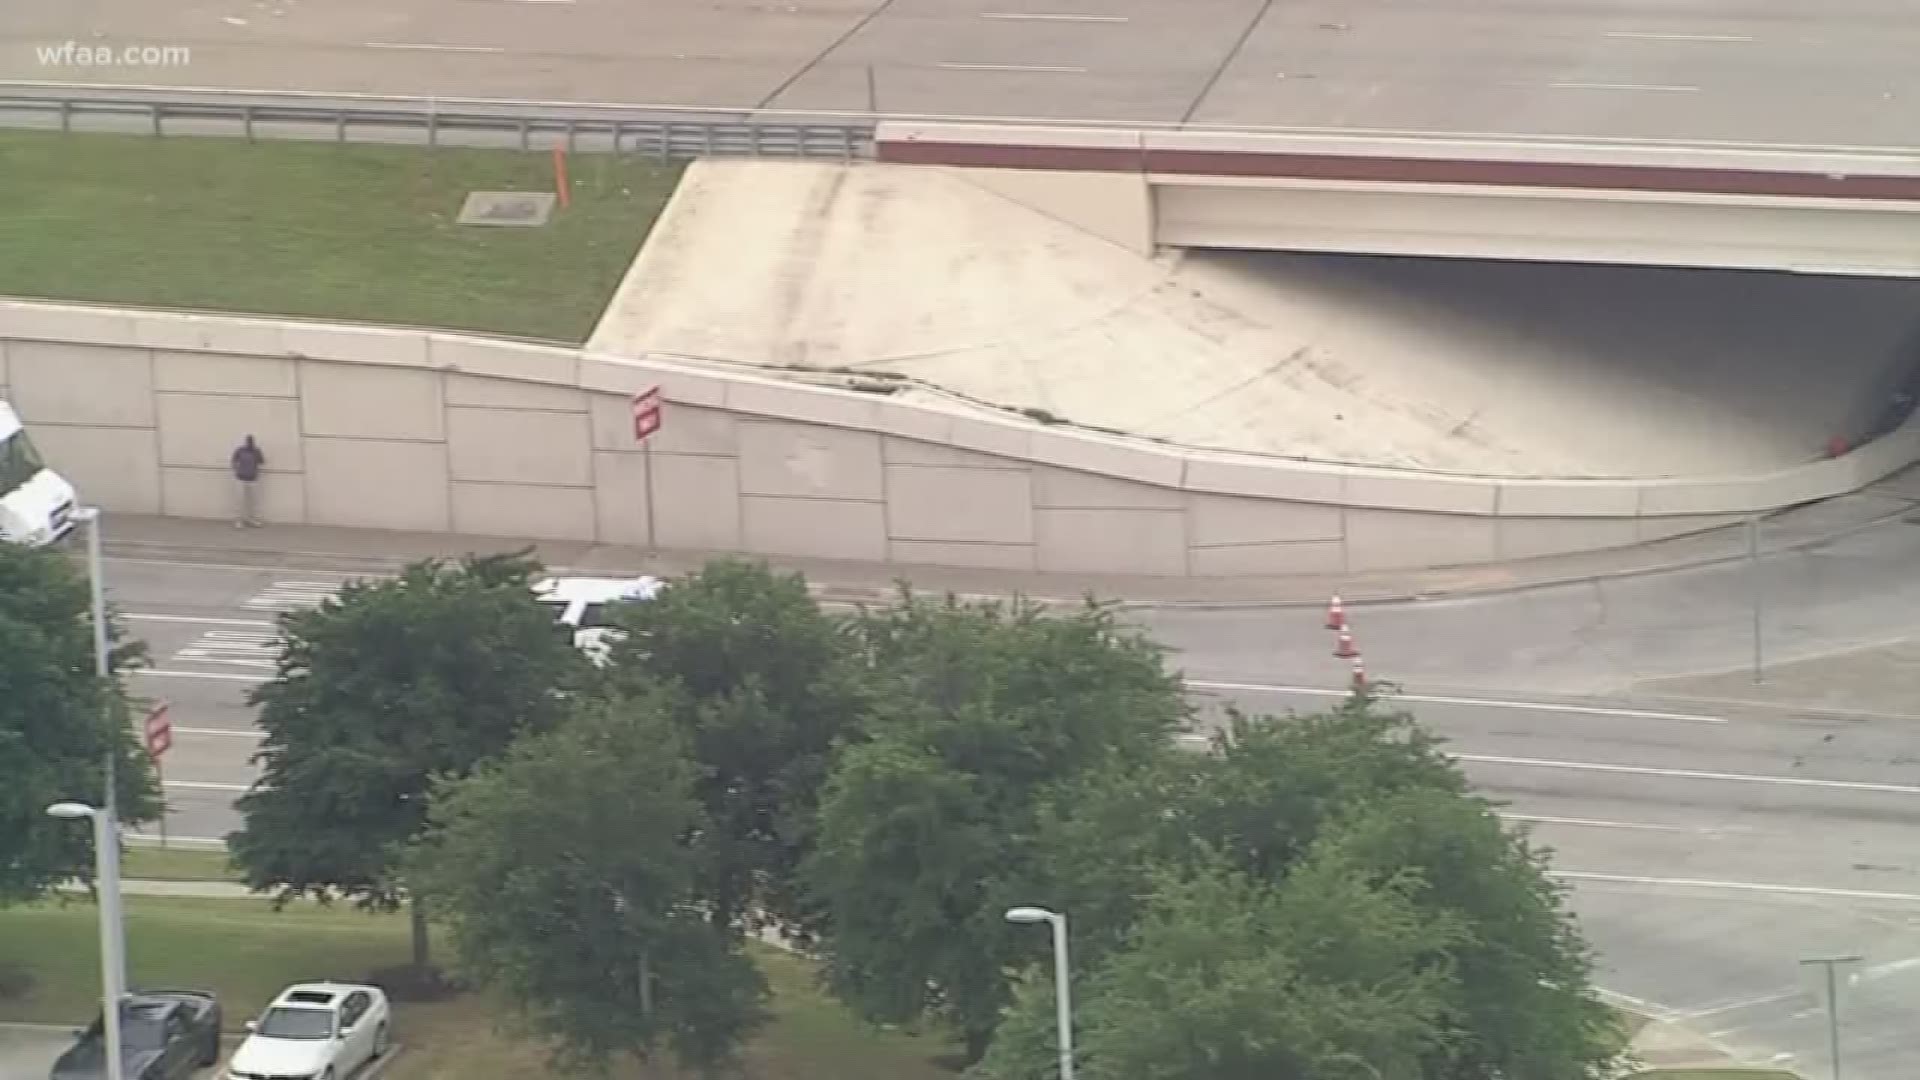 Plano police's bomb squad investigate suspicious item found underneath overpass of Bush Turnpike at Coit